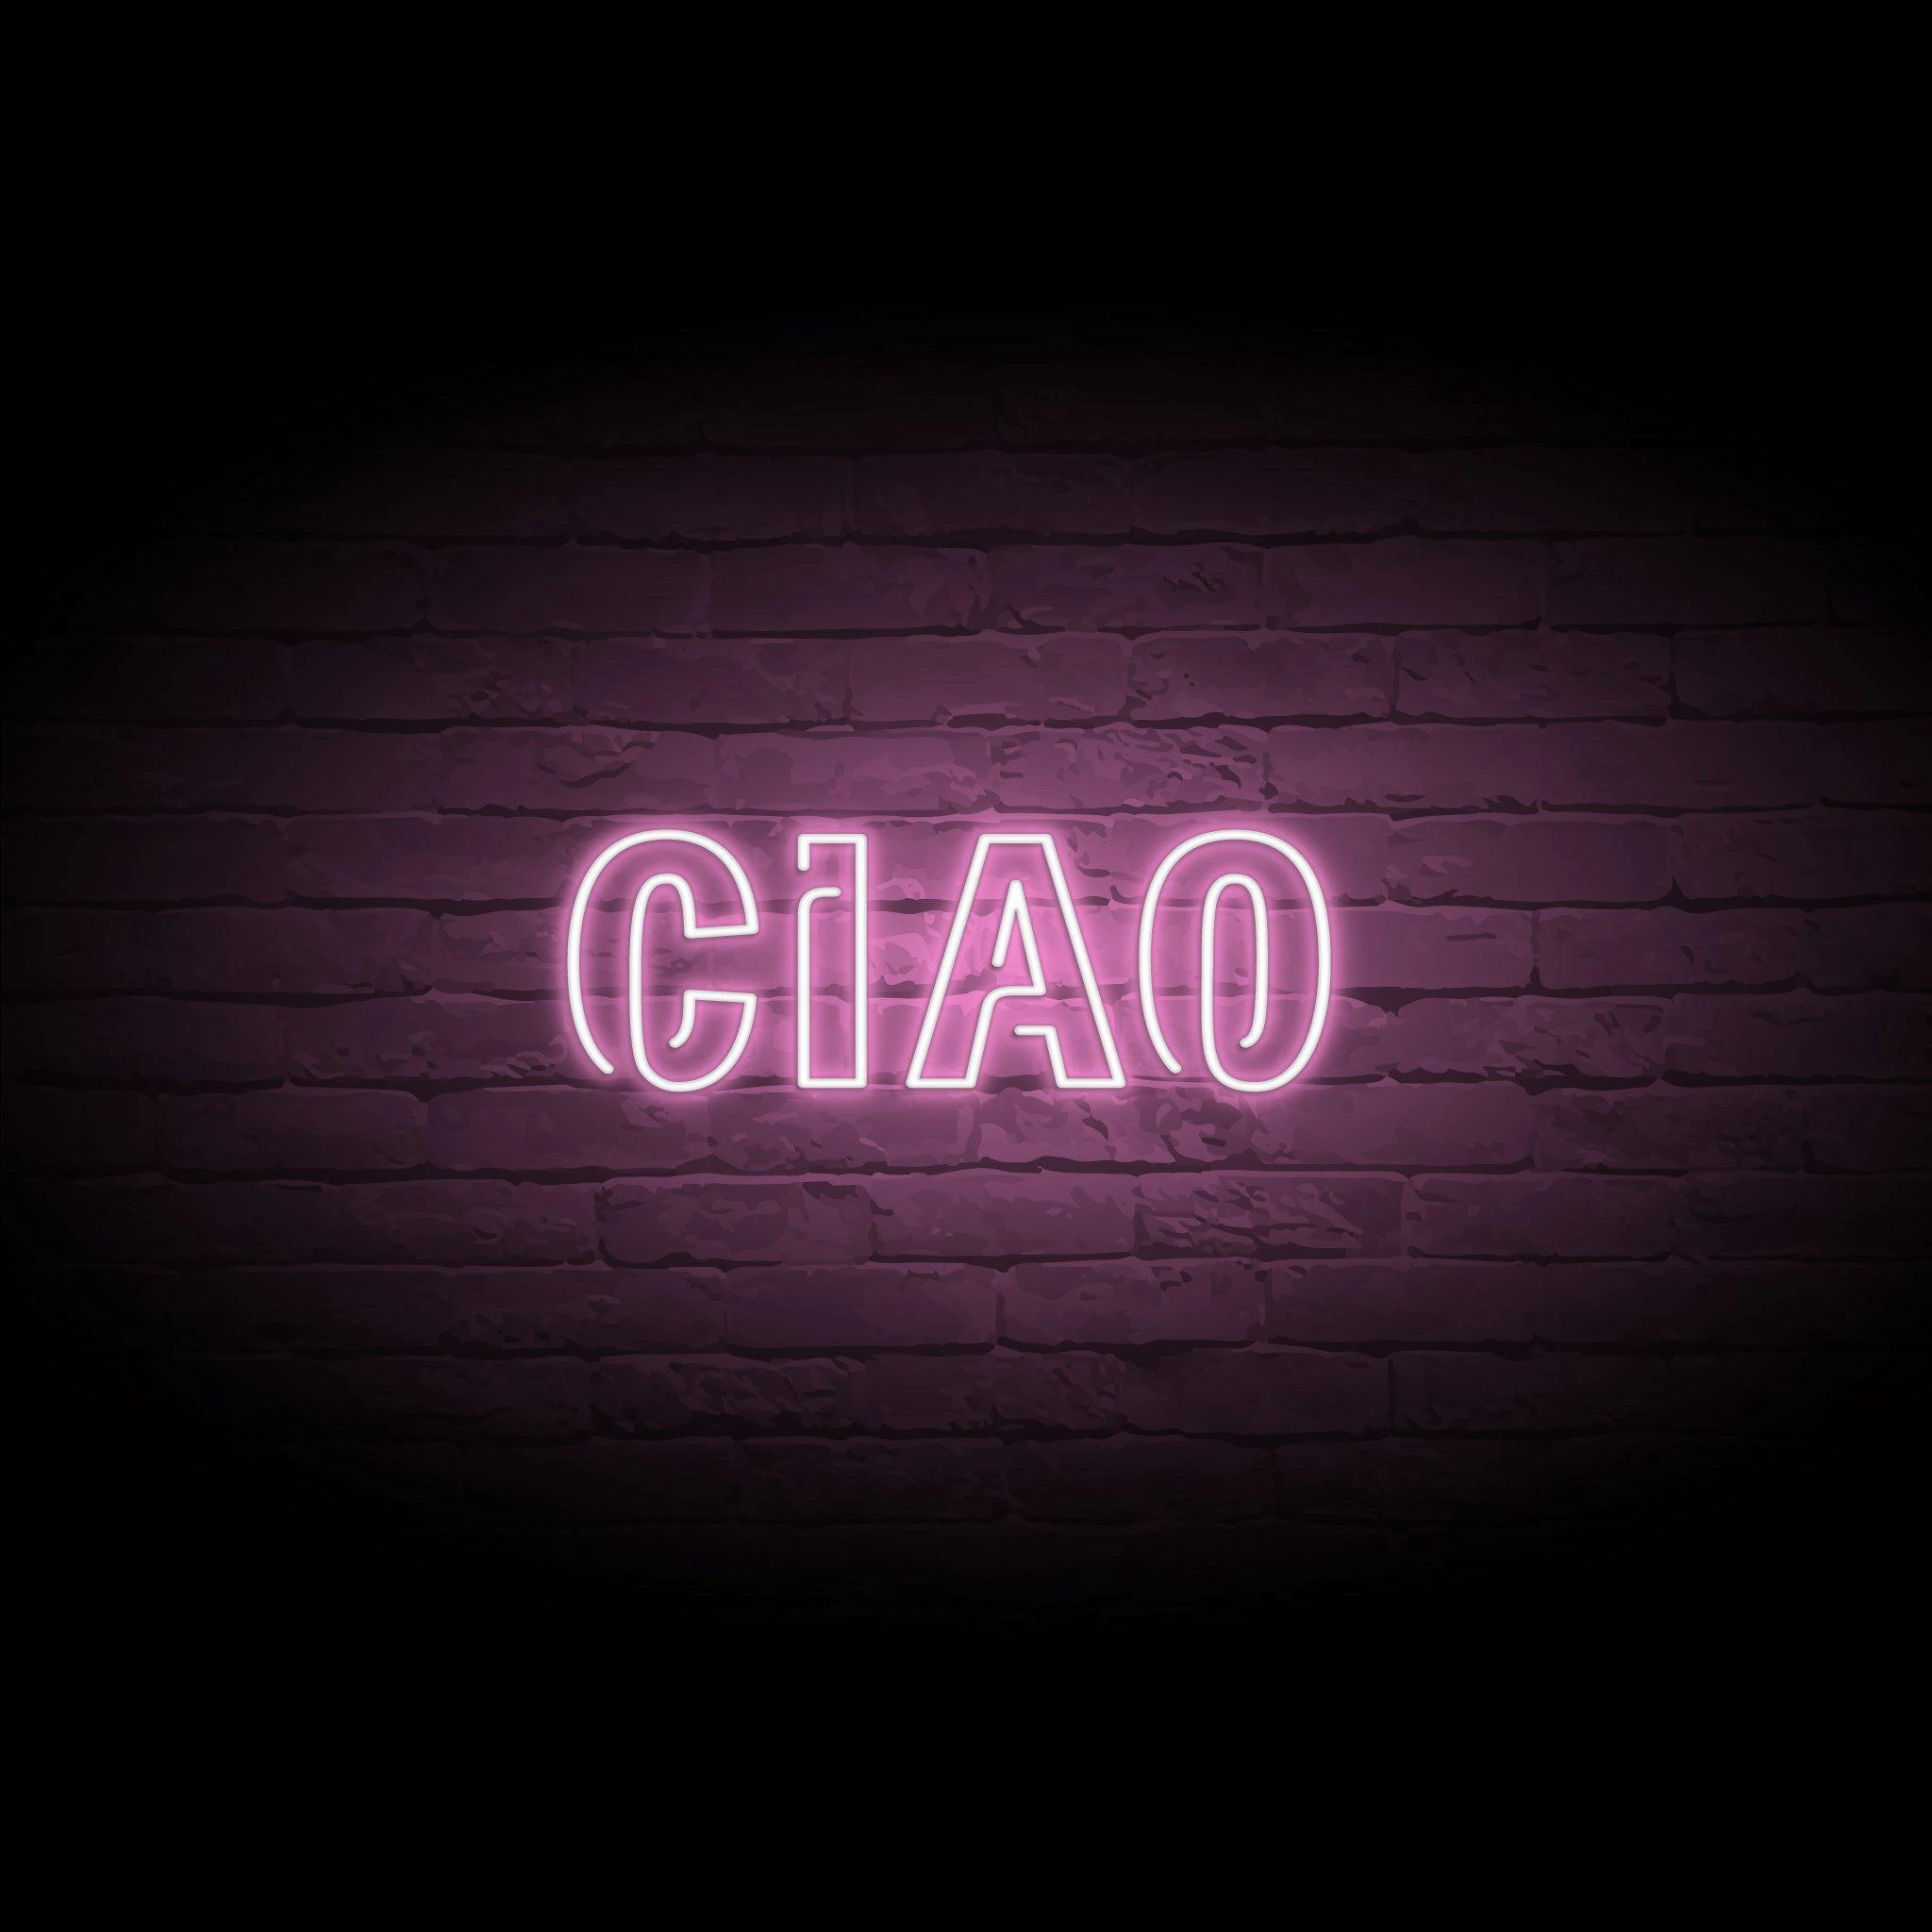 'CIAO' NEON SIGN